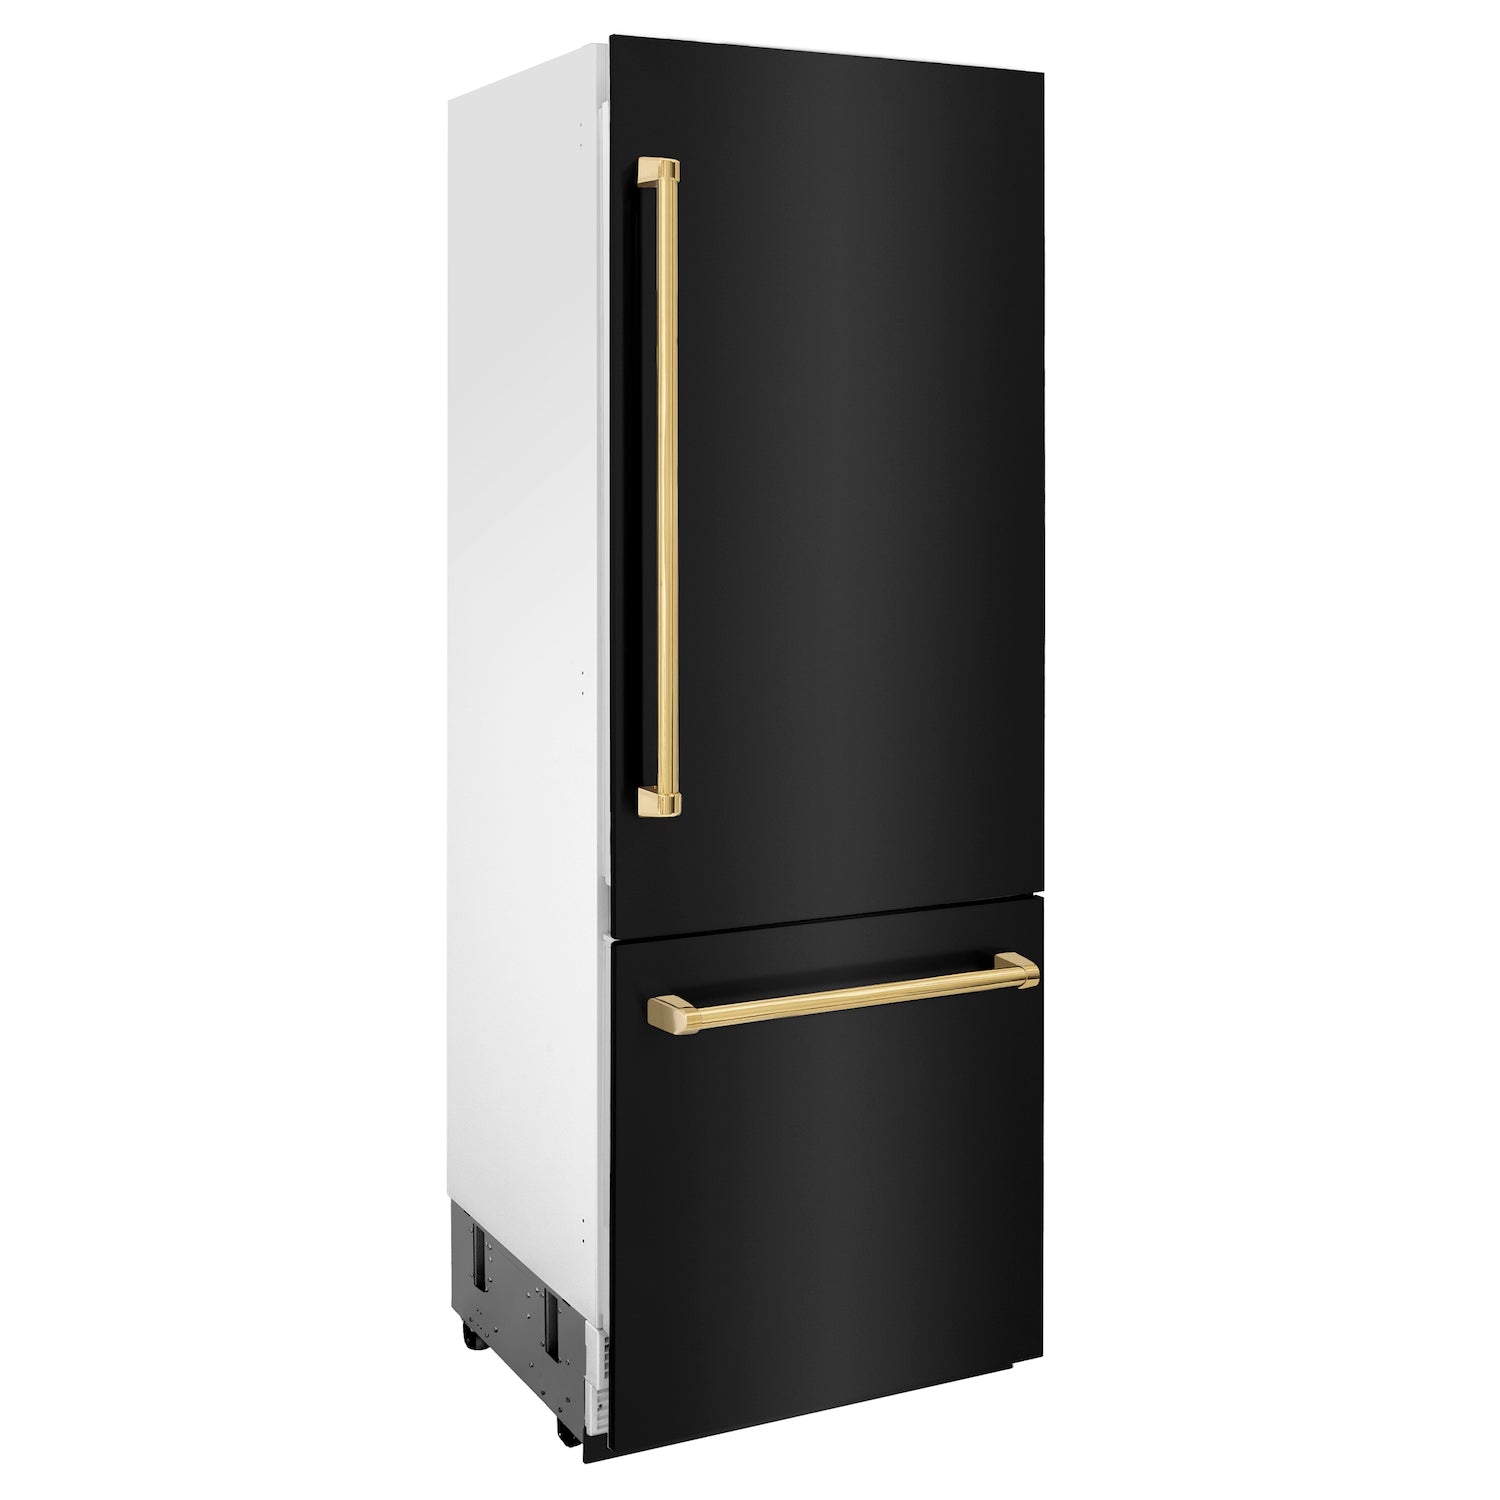 ZLINE Autograph Edition 30 in. 16.1 cu. ft. Built-in 2-Door Bottom Freezer Refrigerator with Internal Water and Ice Dispenser in Black Stainless Steel with Polished Gold Accents (RBIVZ-BS-30-G) side, closed.